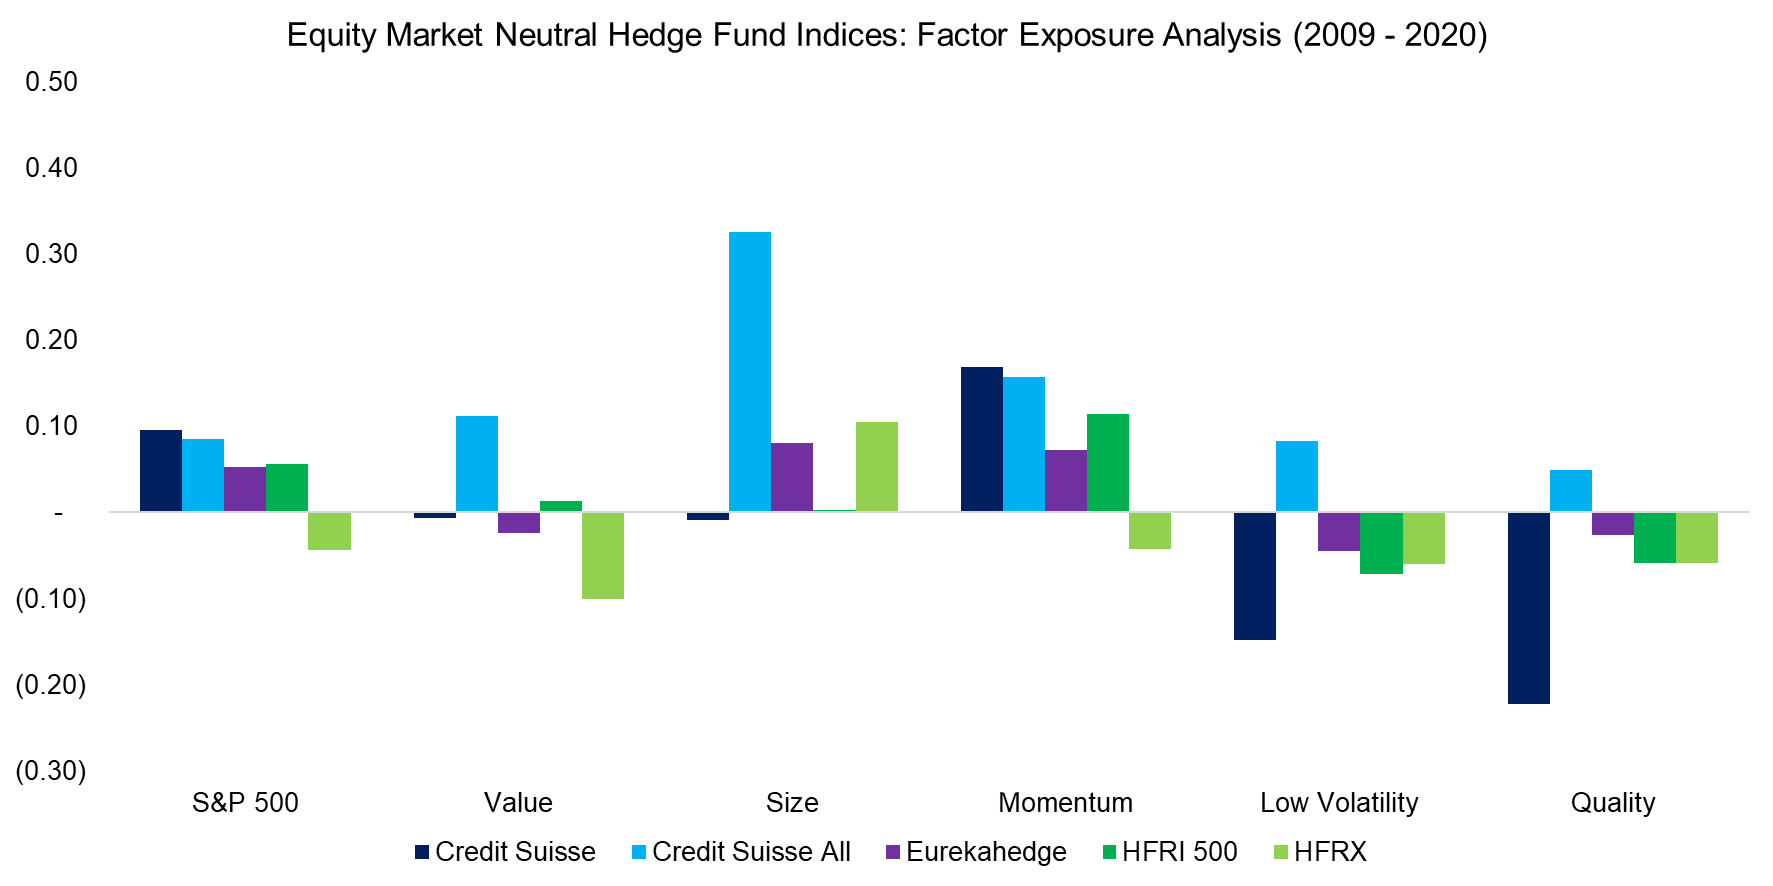 Equity Market Neutral Hedge Fund Indices Factor Exposure Analysis (2009 - 2020)